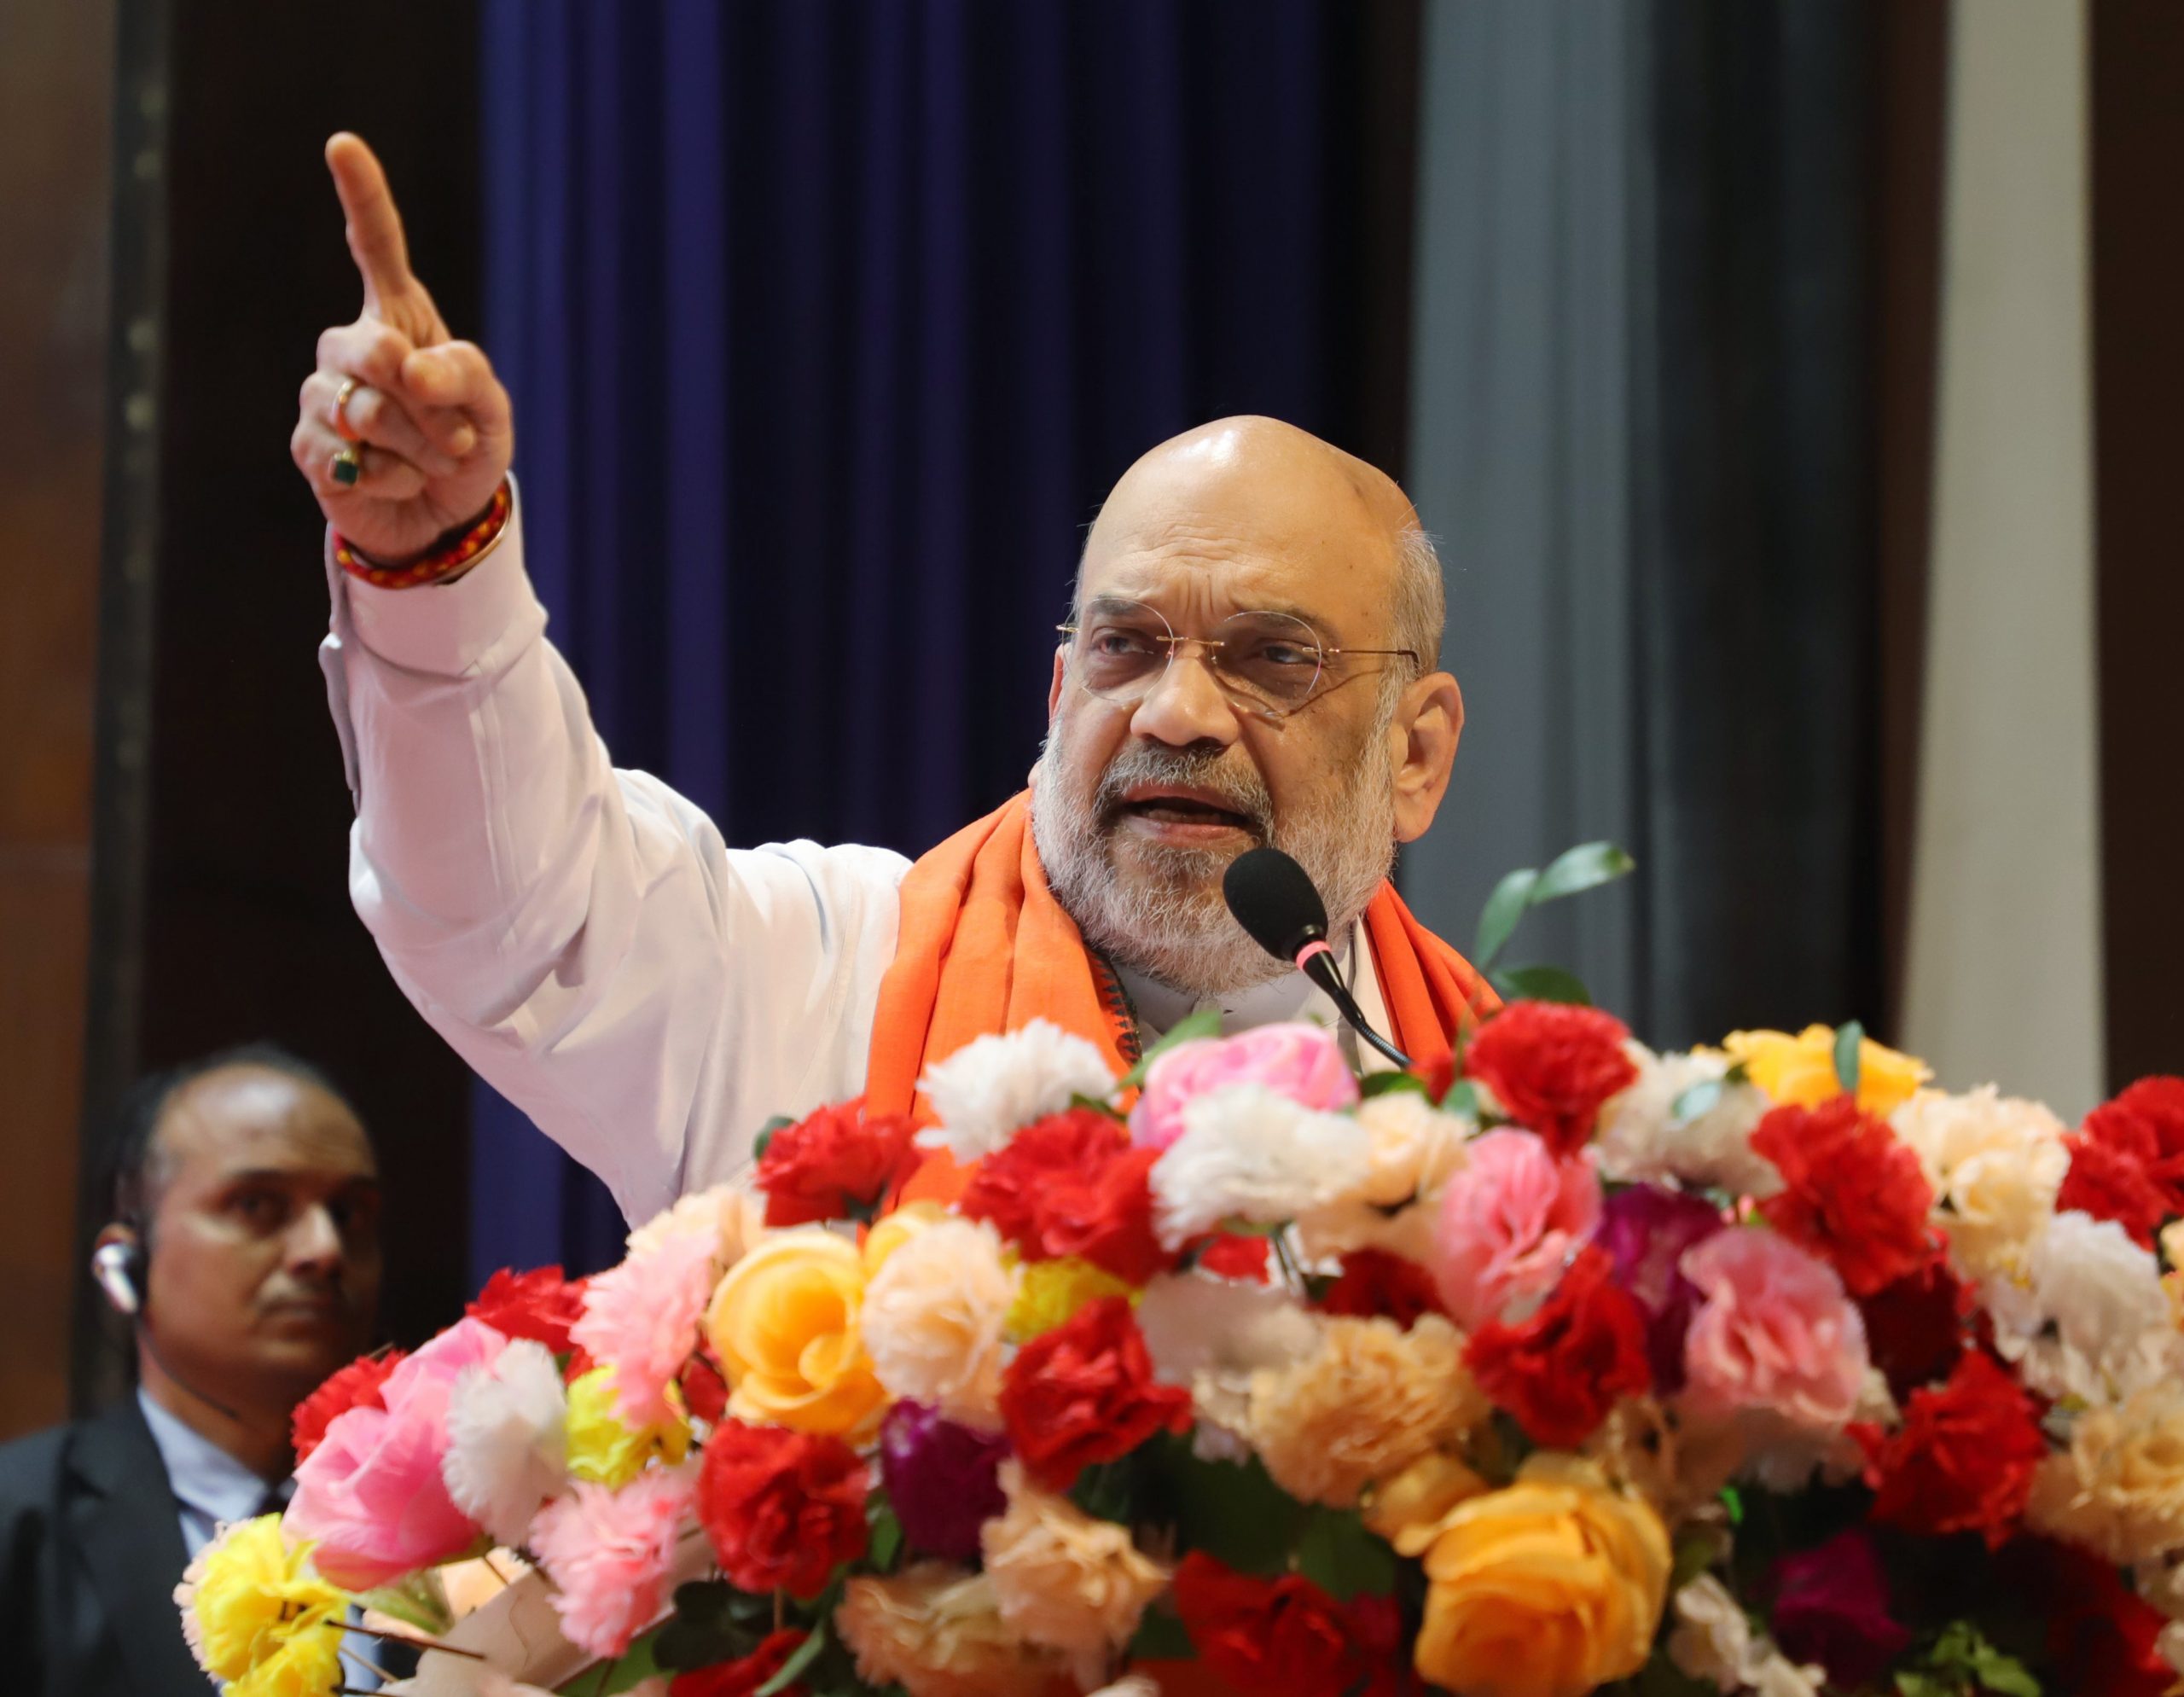 “After 5 years, India’s prison justice system can be most trendy in world”: Amit Shah